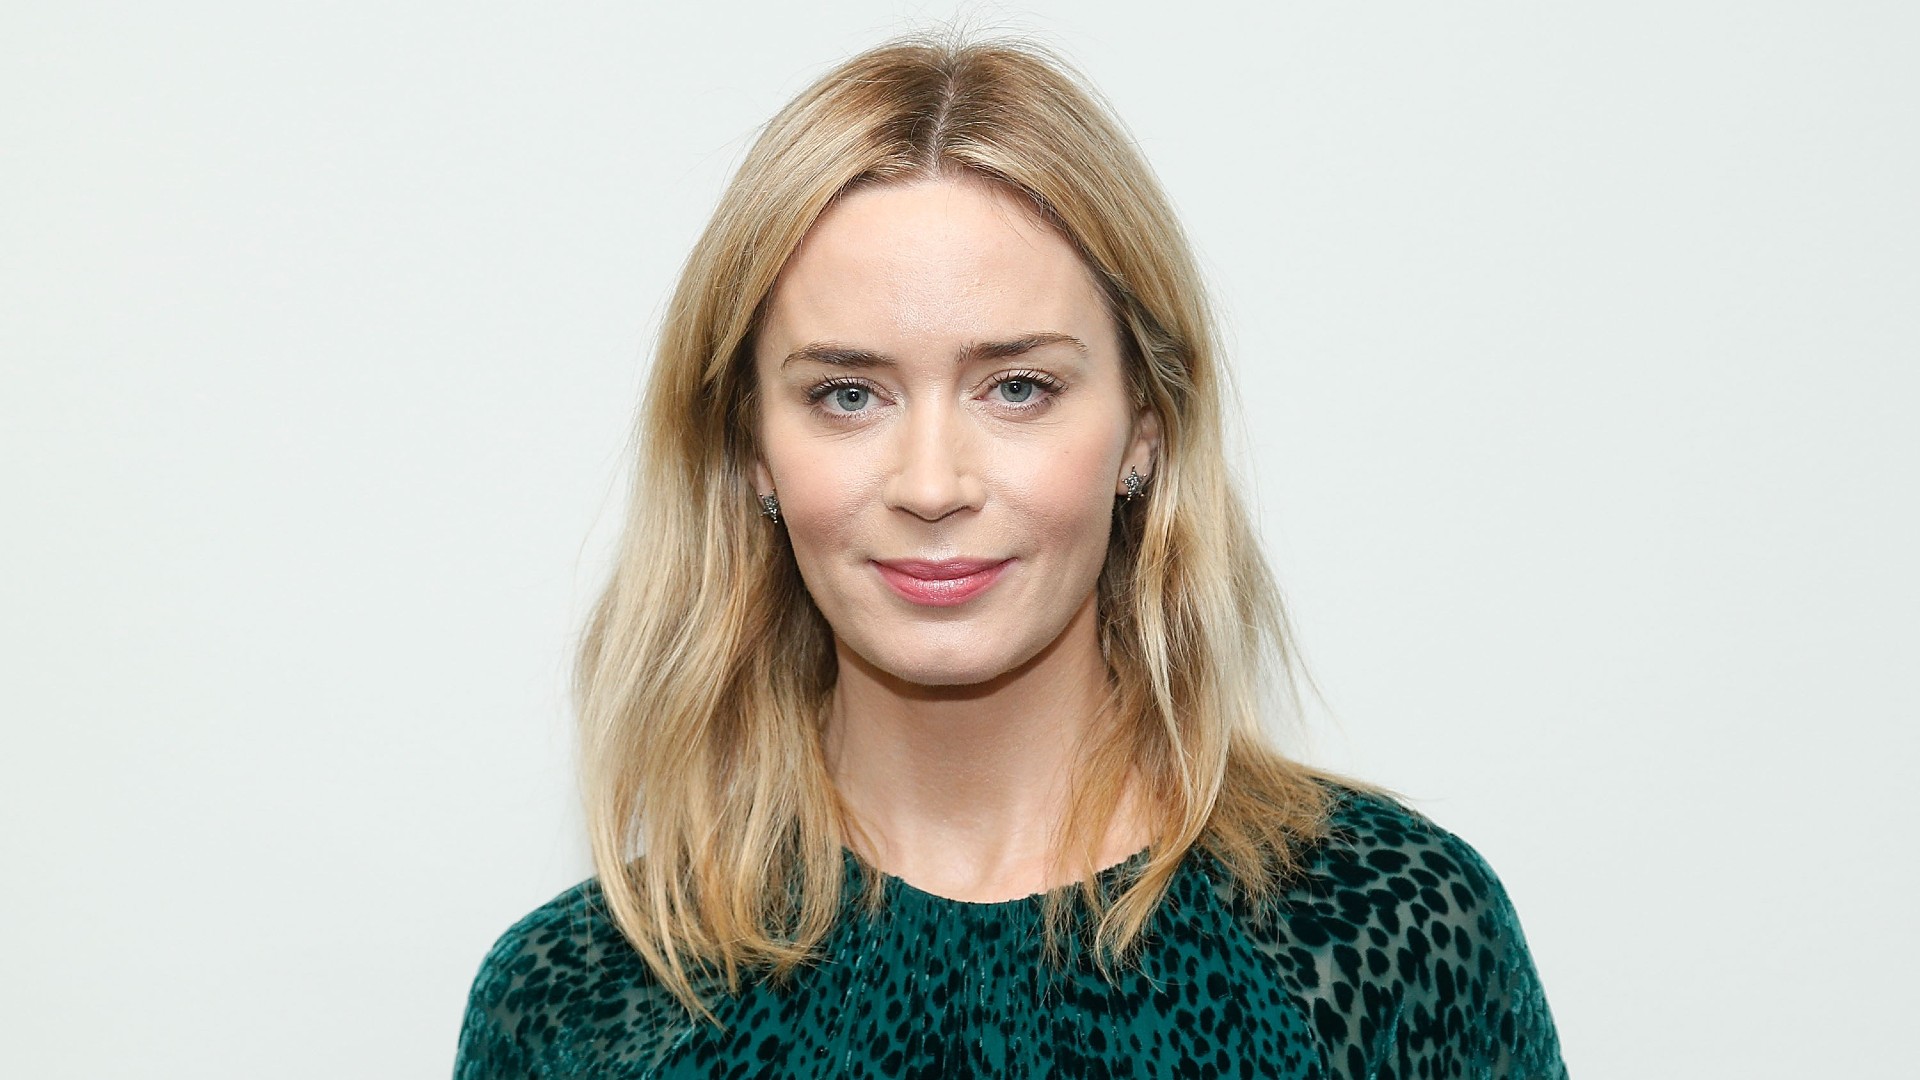 11 Roles That Made Us Love Emily Blunt: From 'The Devil Wears Prada' to 'A Quiet Place'